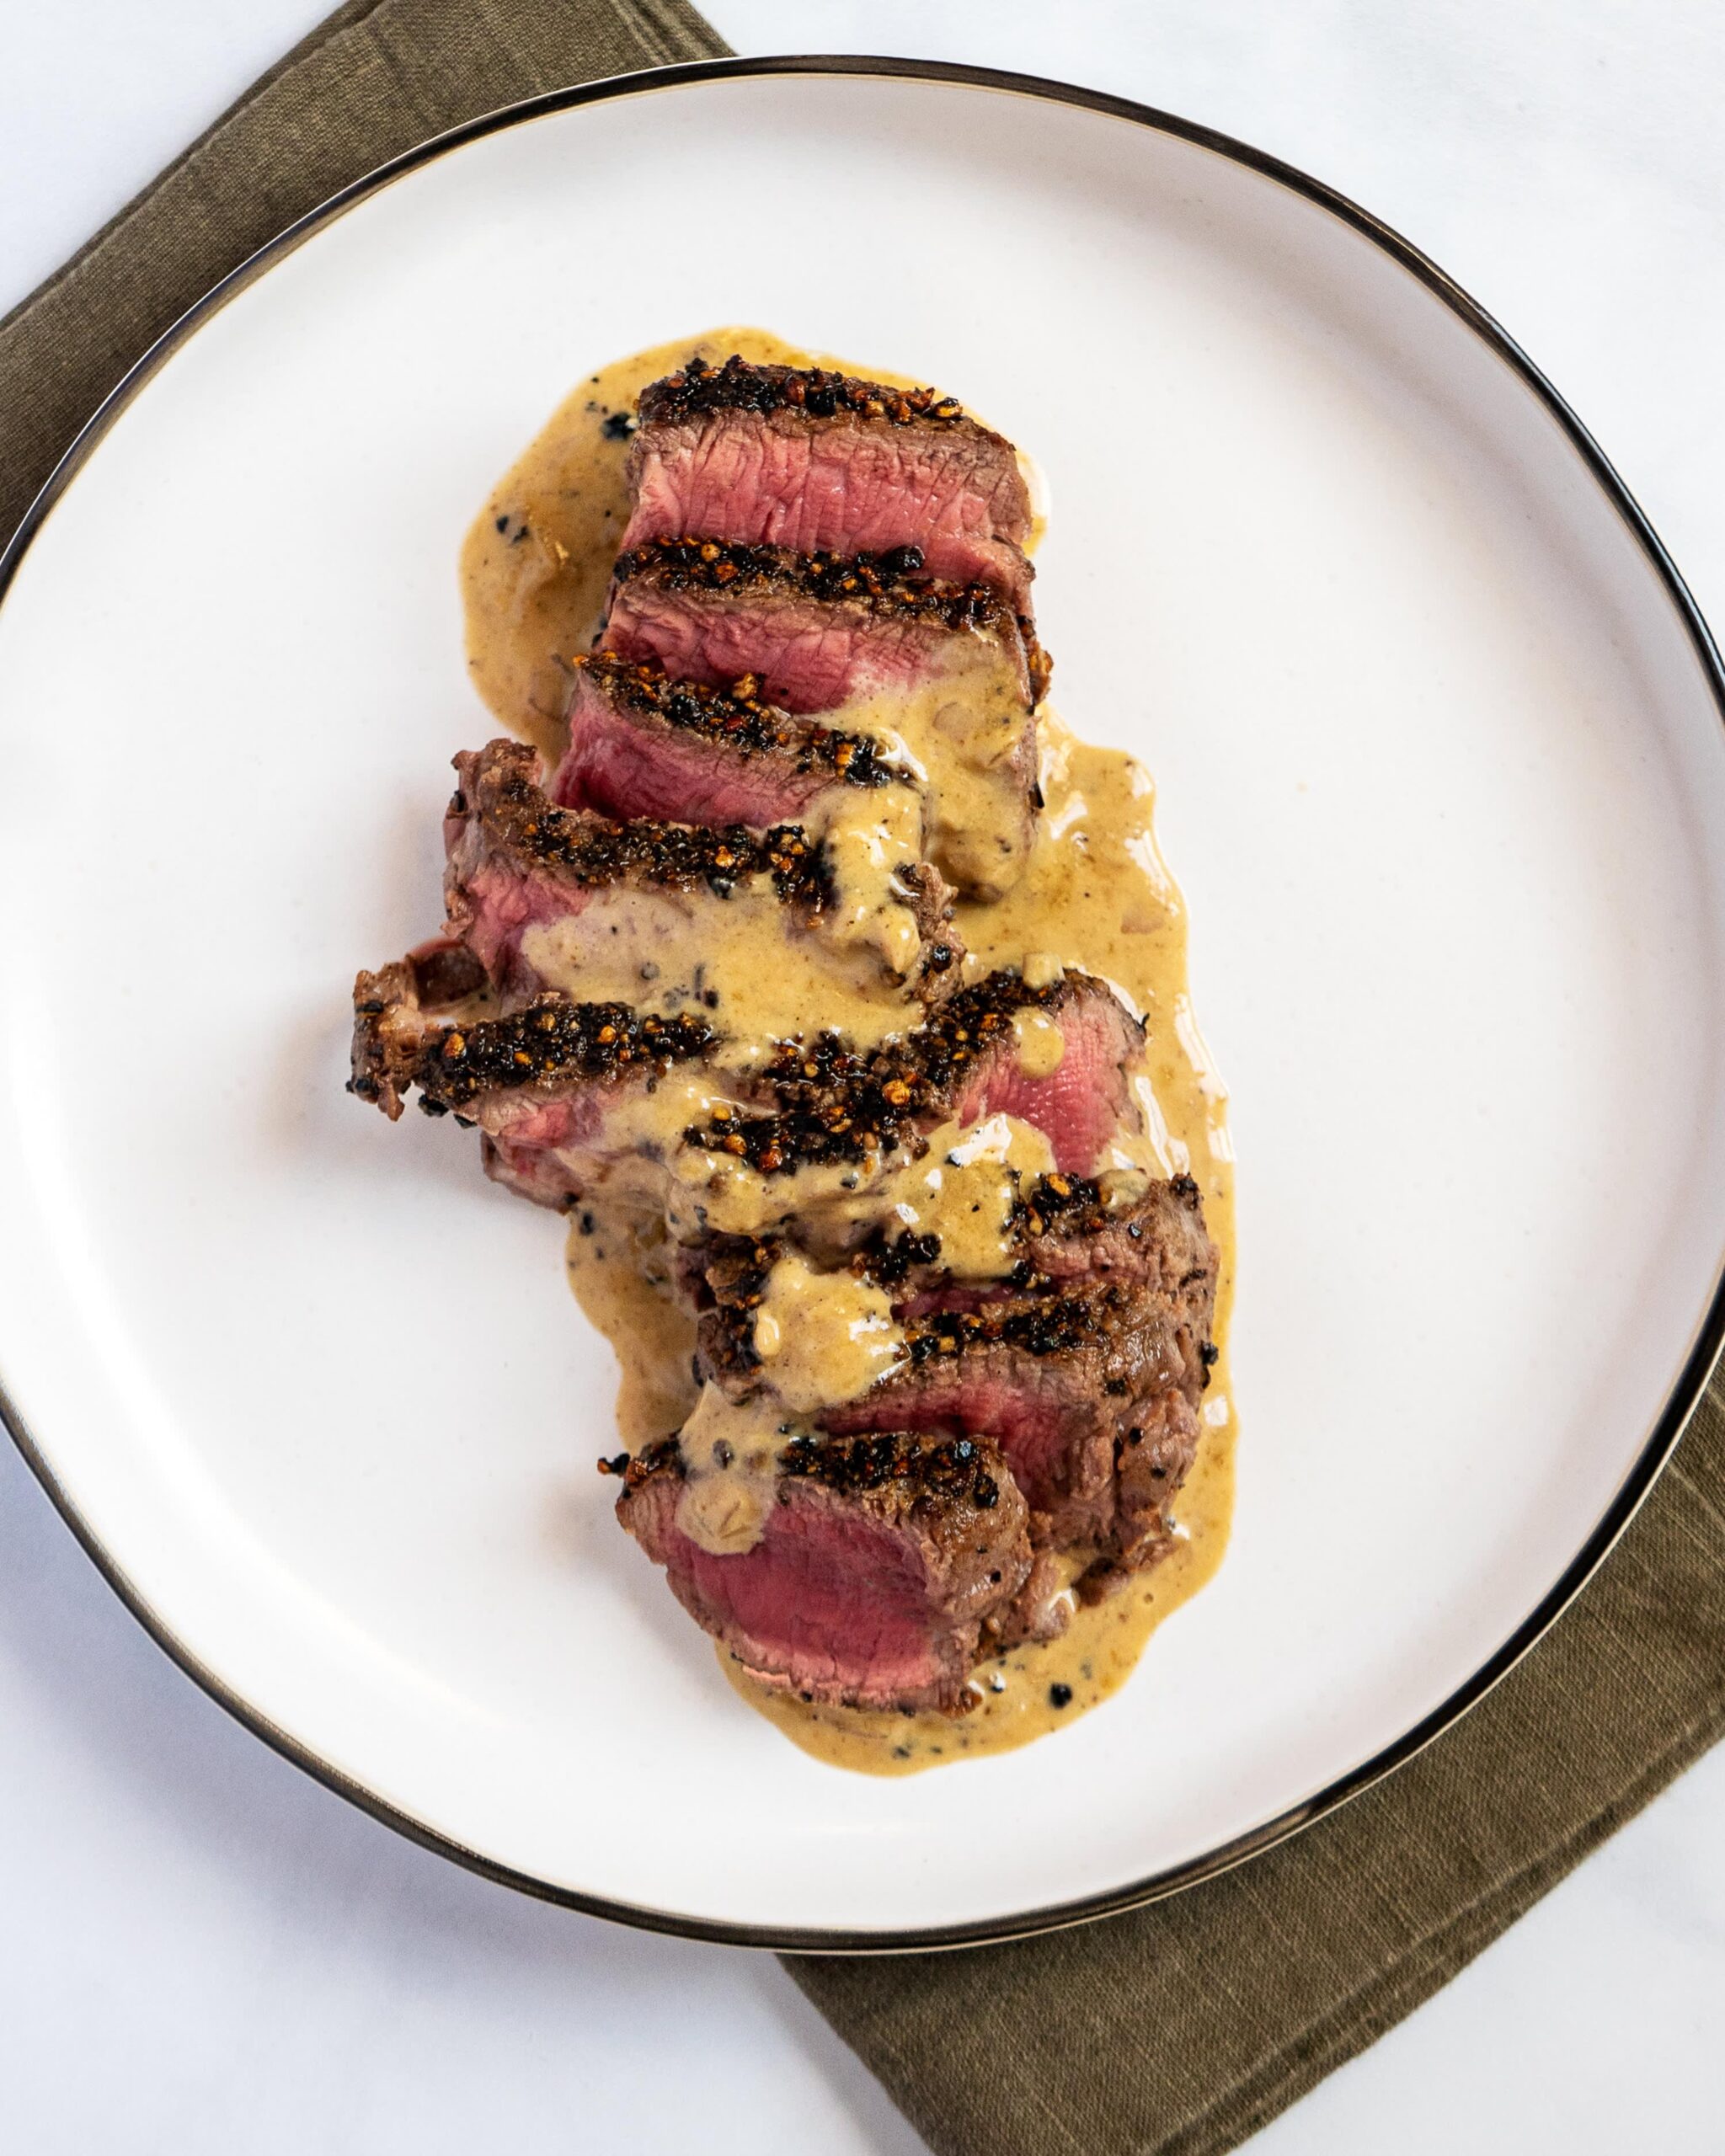  Don't be surprised if this steak becomes your new favorite recipe